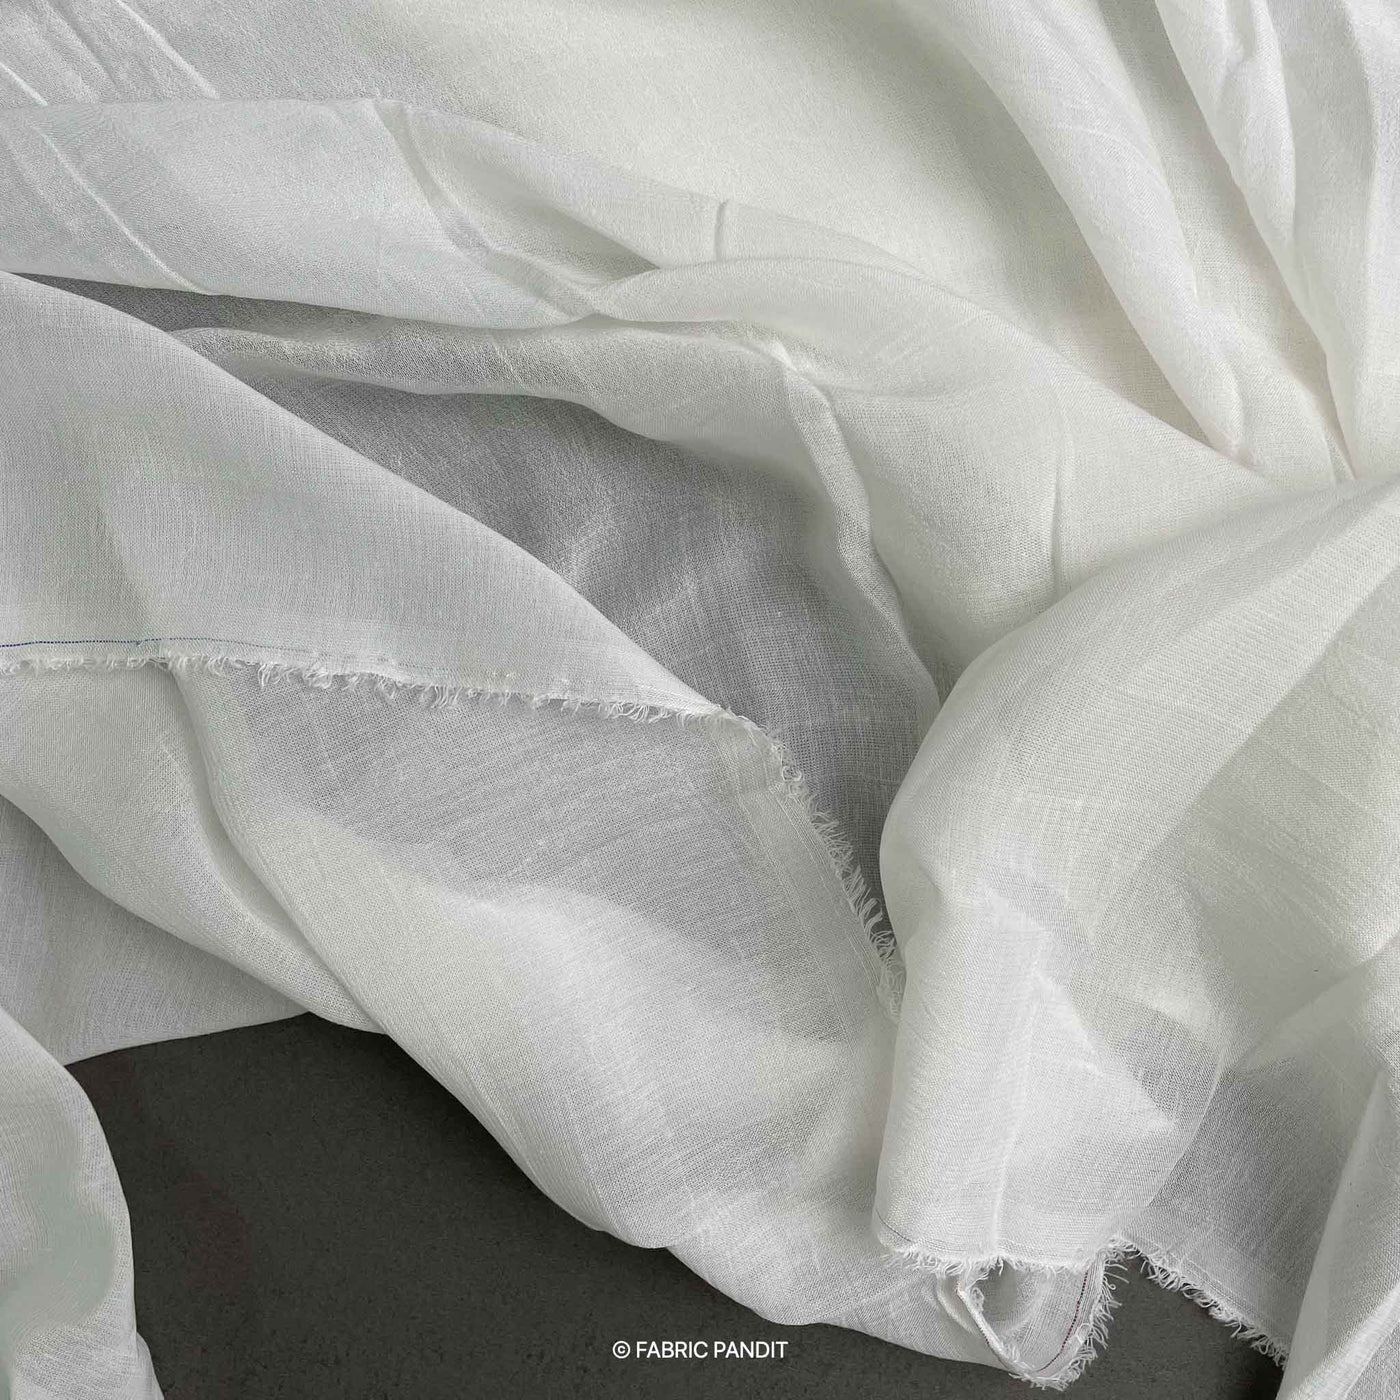 Fabric Pandit White Plain Dyeable Pure Modal Georgette Fabric (Width 44 inches)